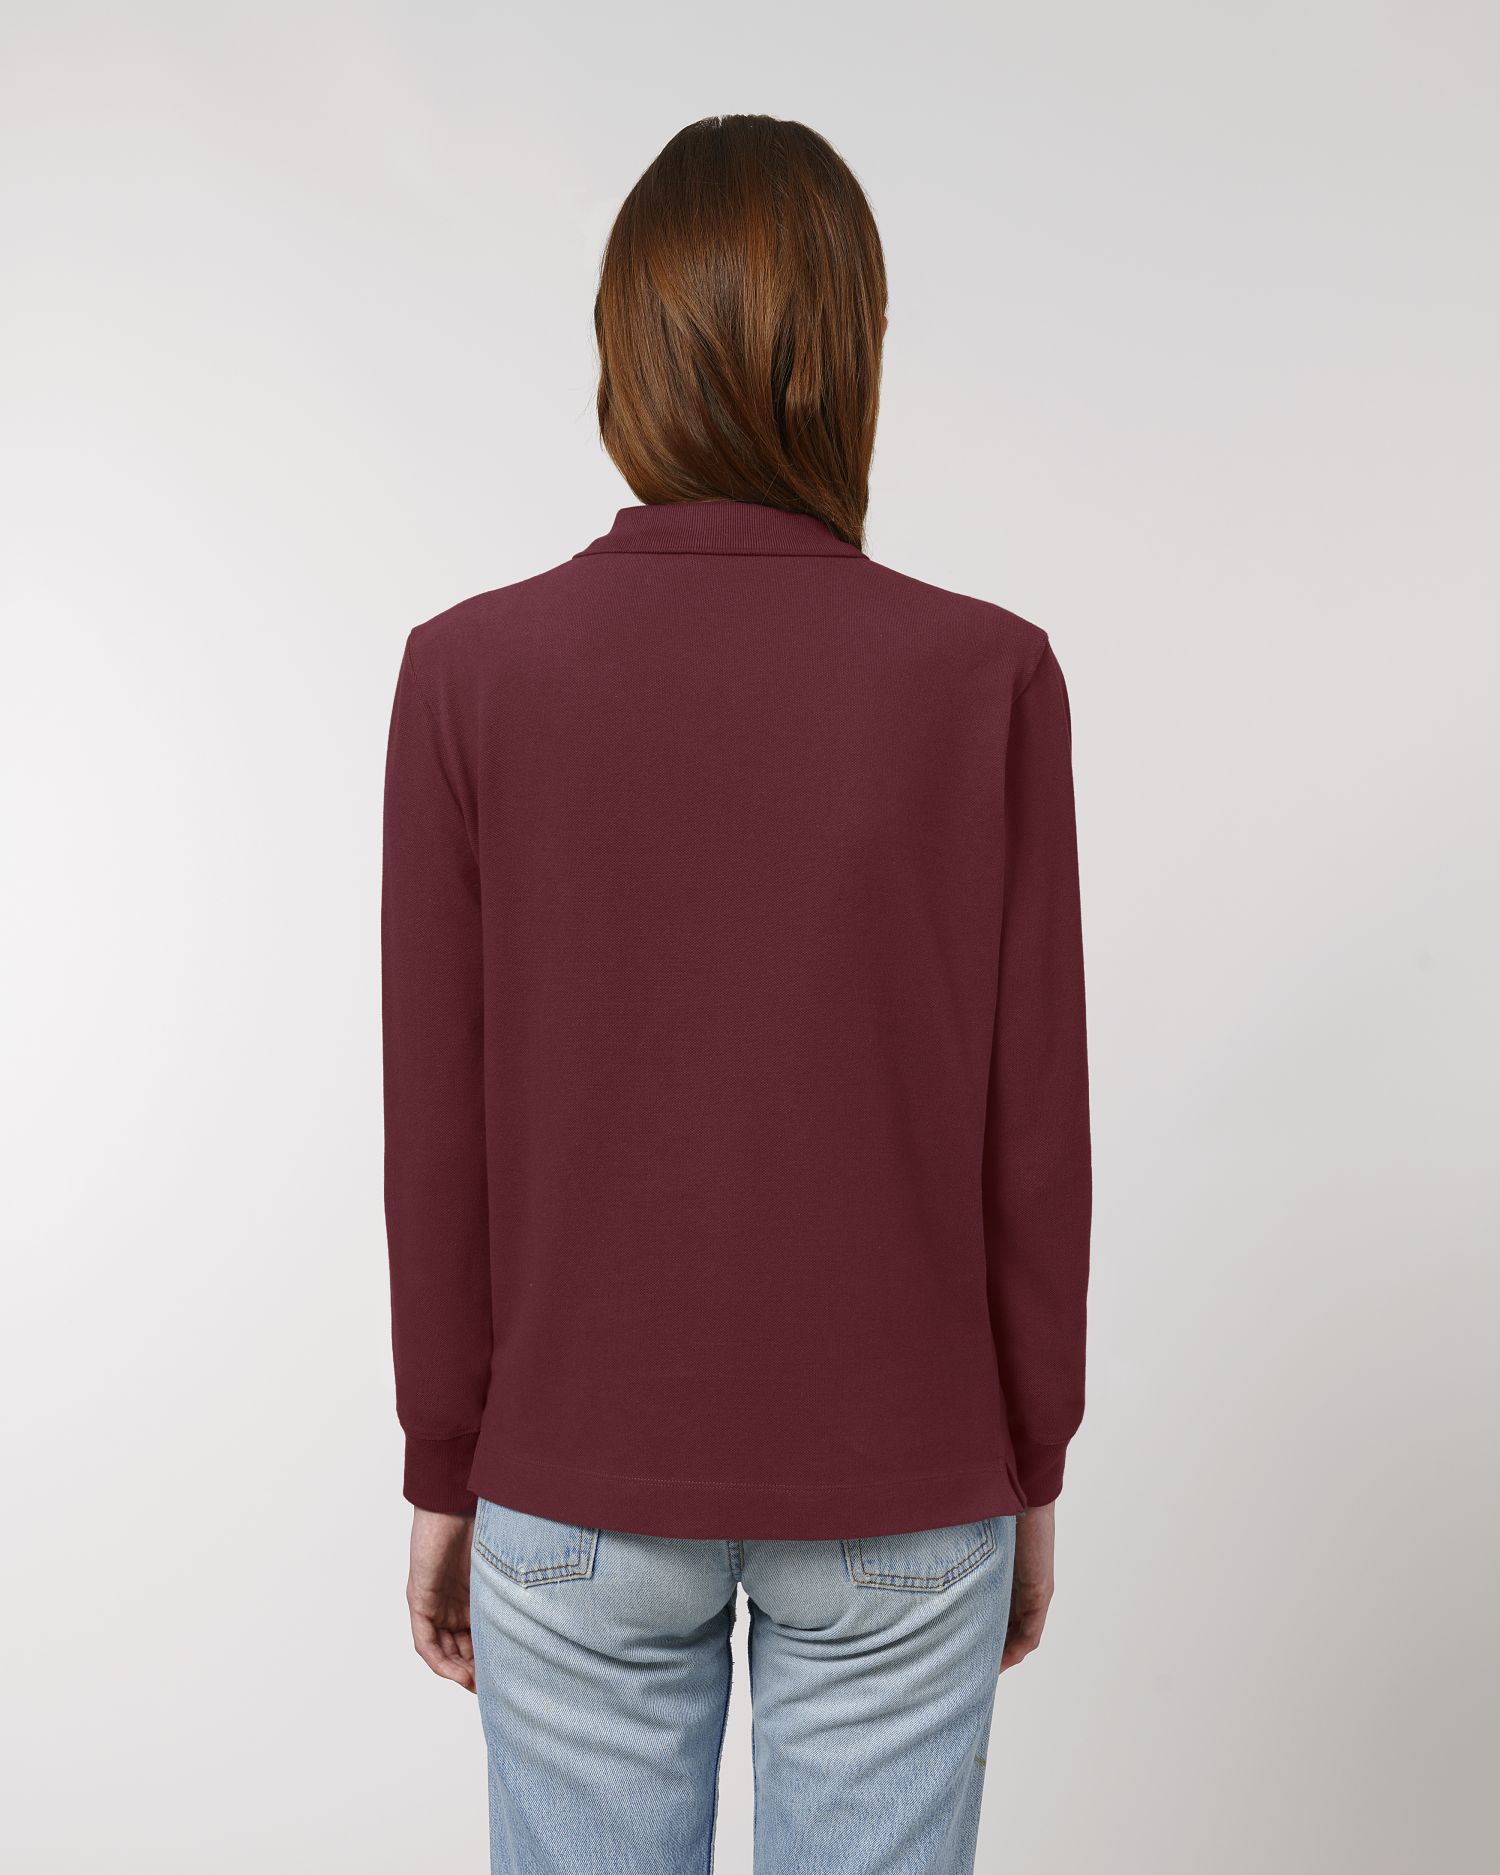  Prepster Long Sleeve in Farbe Burgundy